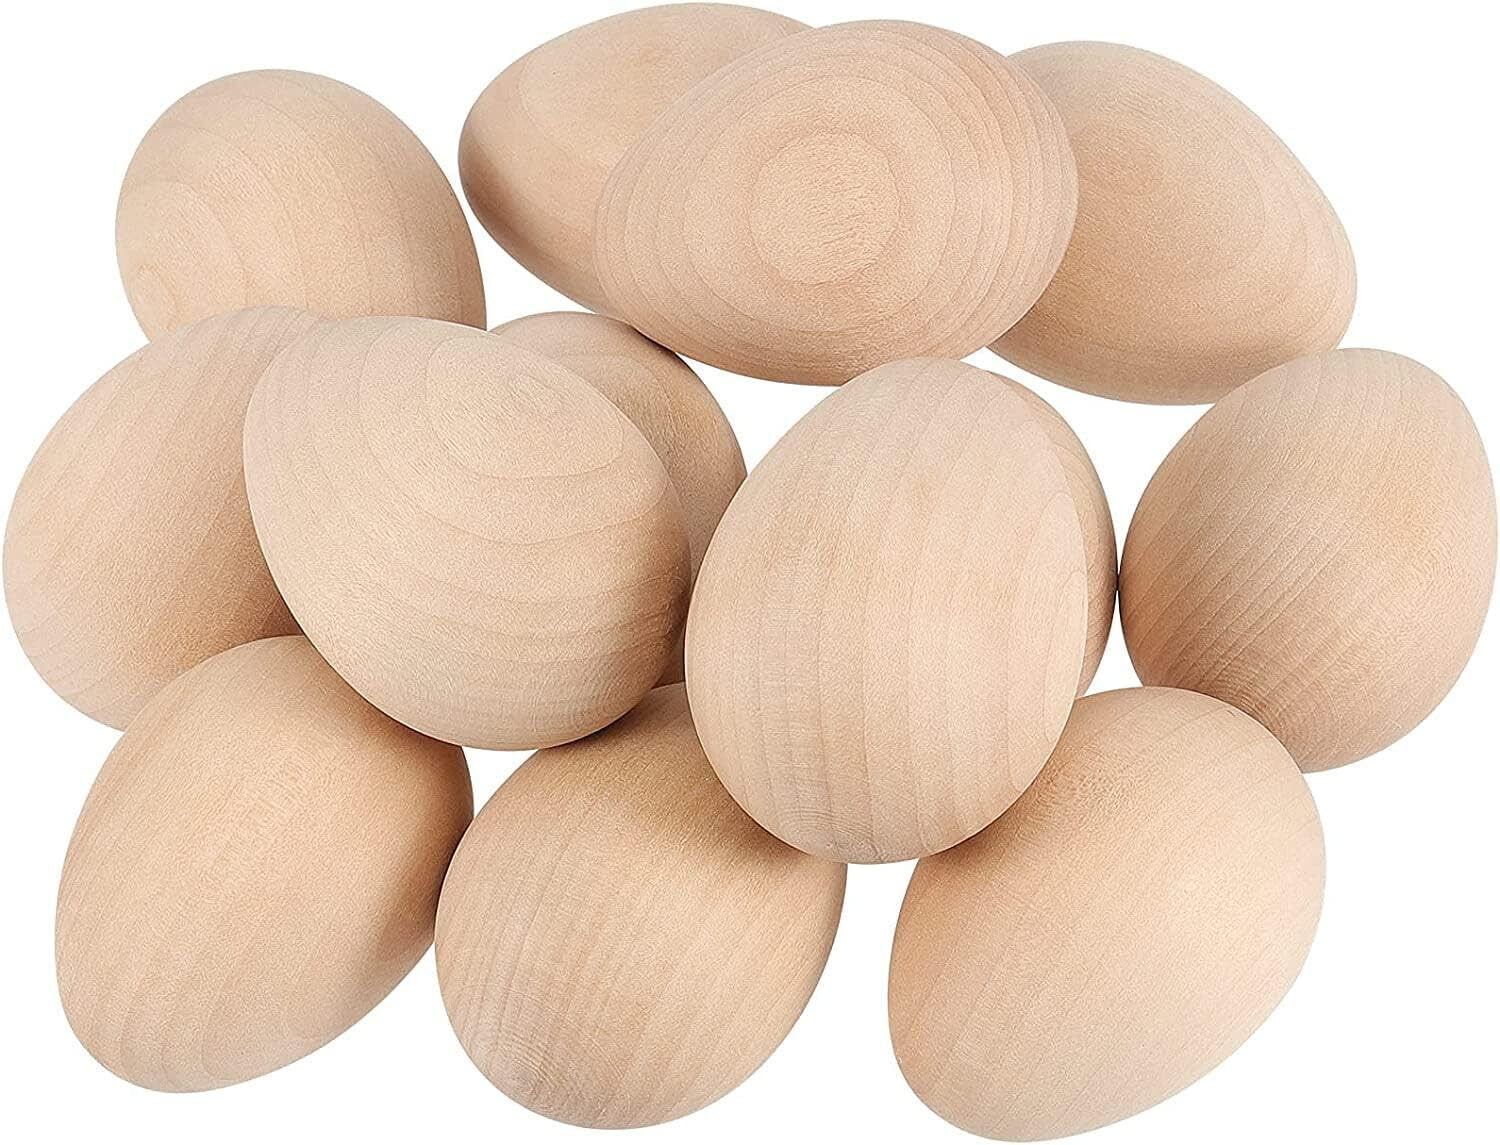 Set of 13 Unfinished Wooden Eggs Unpainted Easter Decoration Smooth Faux Egg